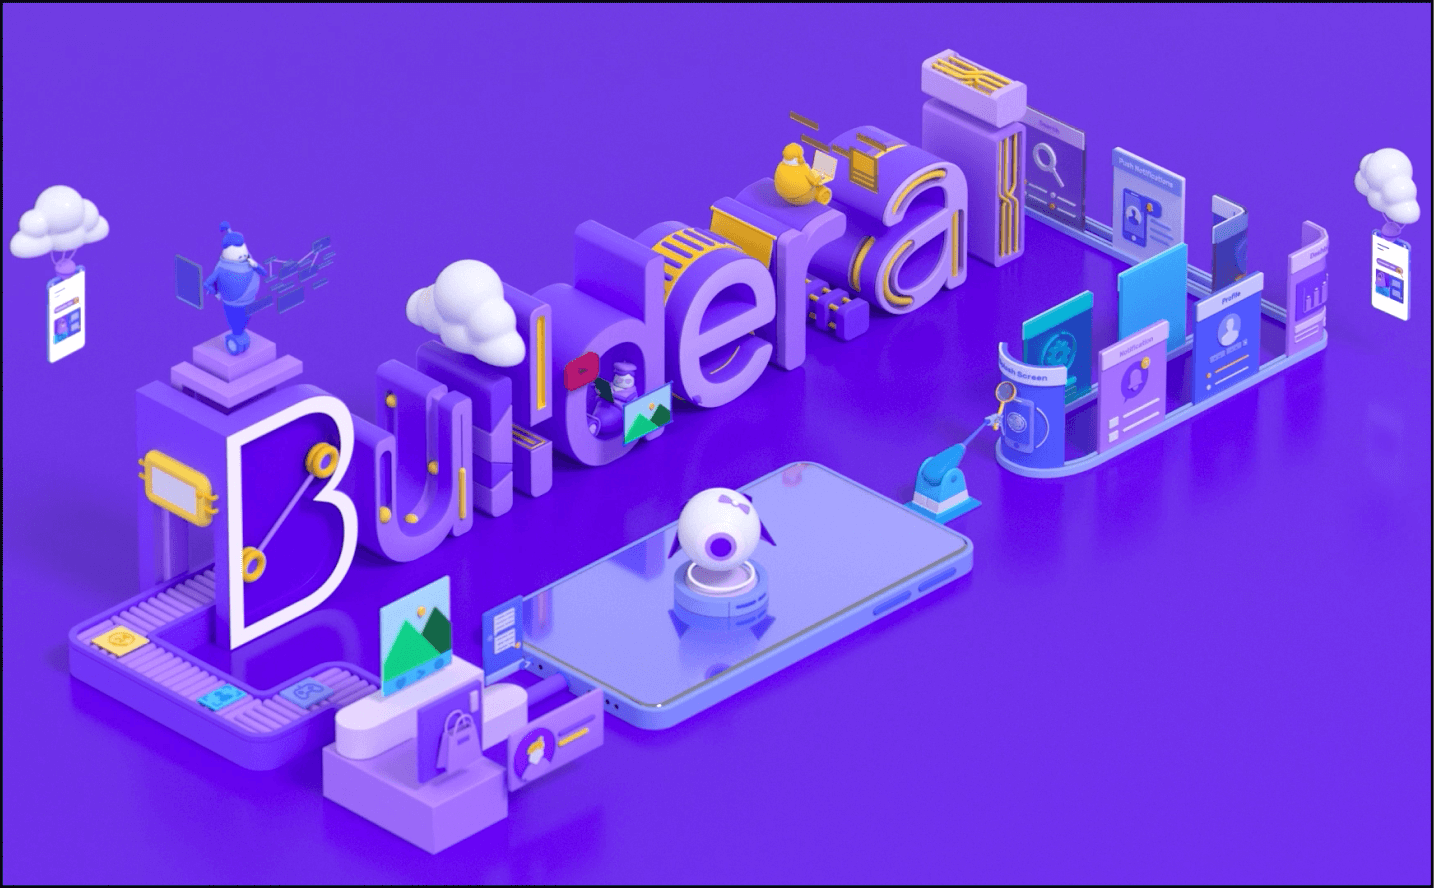 A concept of mobile app development with AI, depicting Builder.ai’s software assembly line